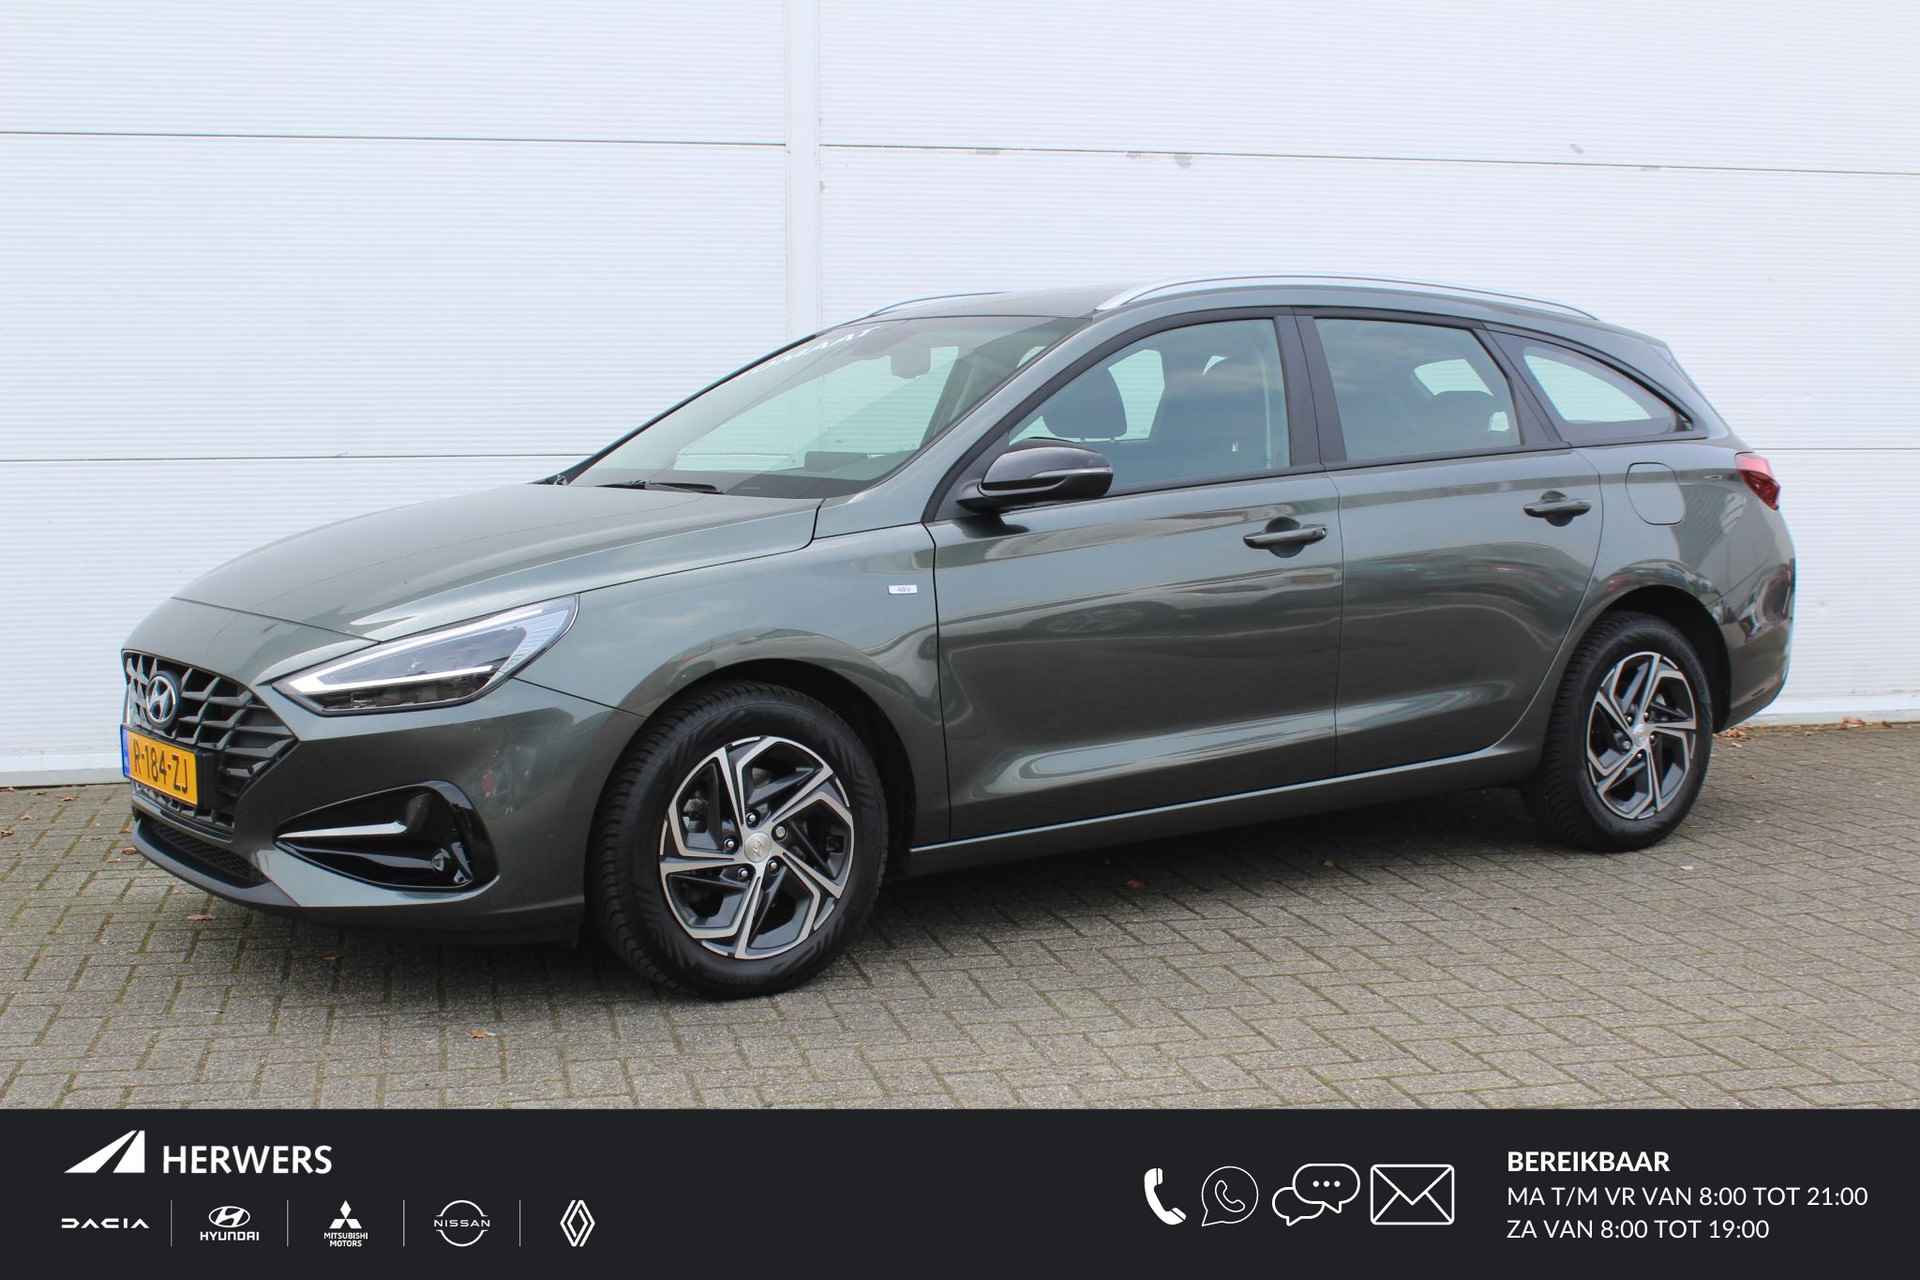 Hyundai i30 Wagon 1.0 T-GDi MHEV Comfort Smart AUTOMAAT / Navigatie + Apple Carplay/Android Auto / Cruise Control / Achteruitrijcamera / Climate Control / Keyless Entry & Start / - 1/43